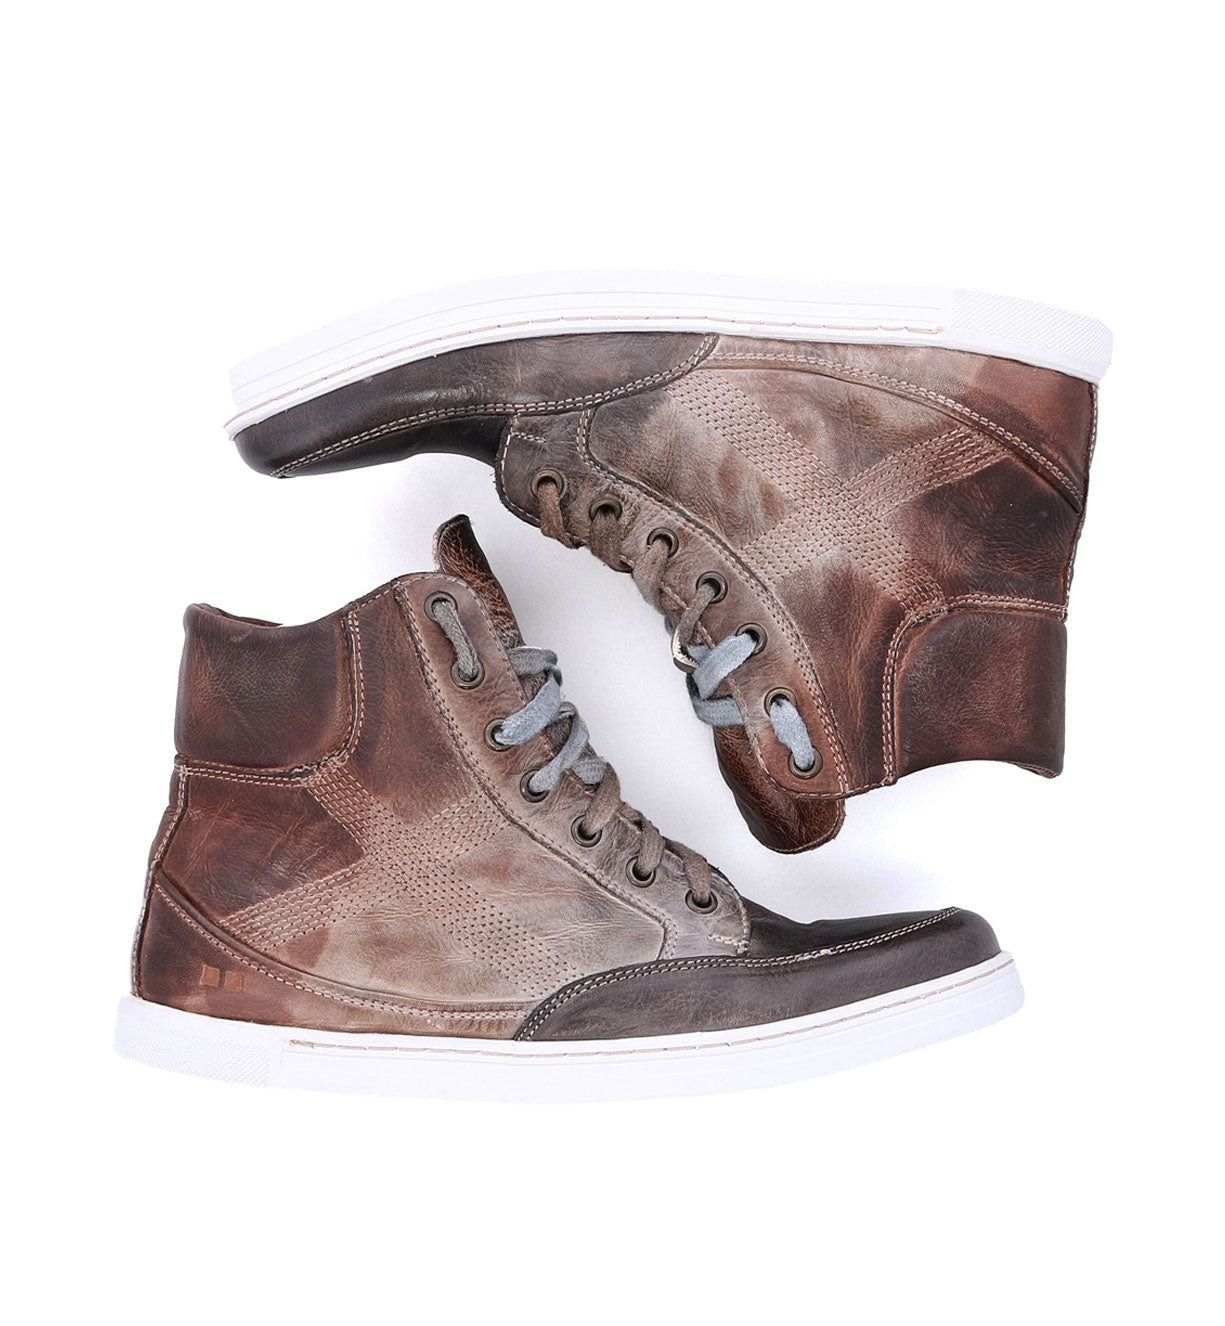 A pair of Bed Stu Lordmind men's brown high top sneakers on a white background.